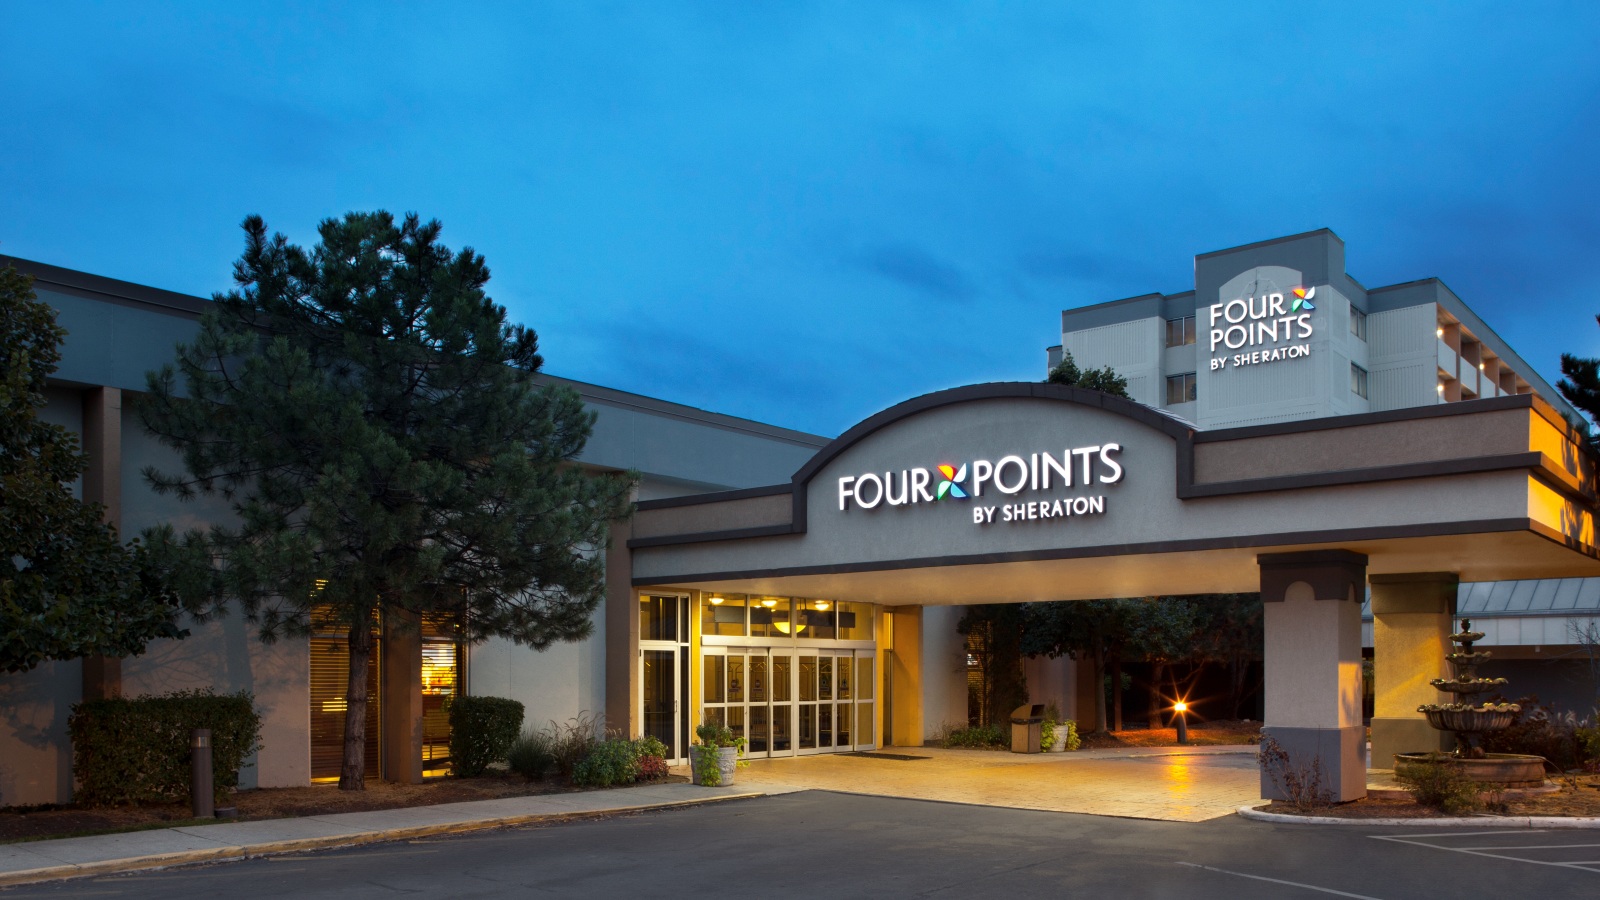 Four Points by Sheraton Chicago O'Hare Airport image